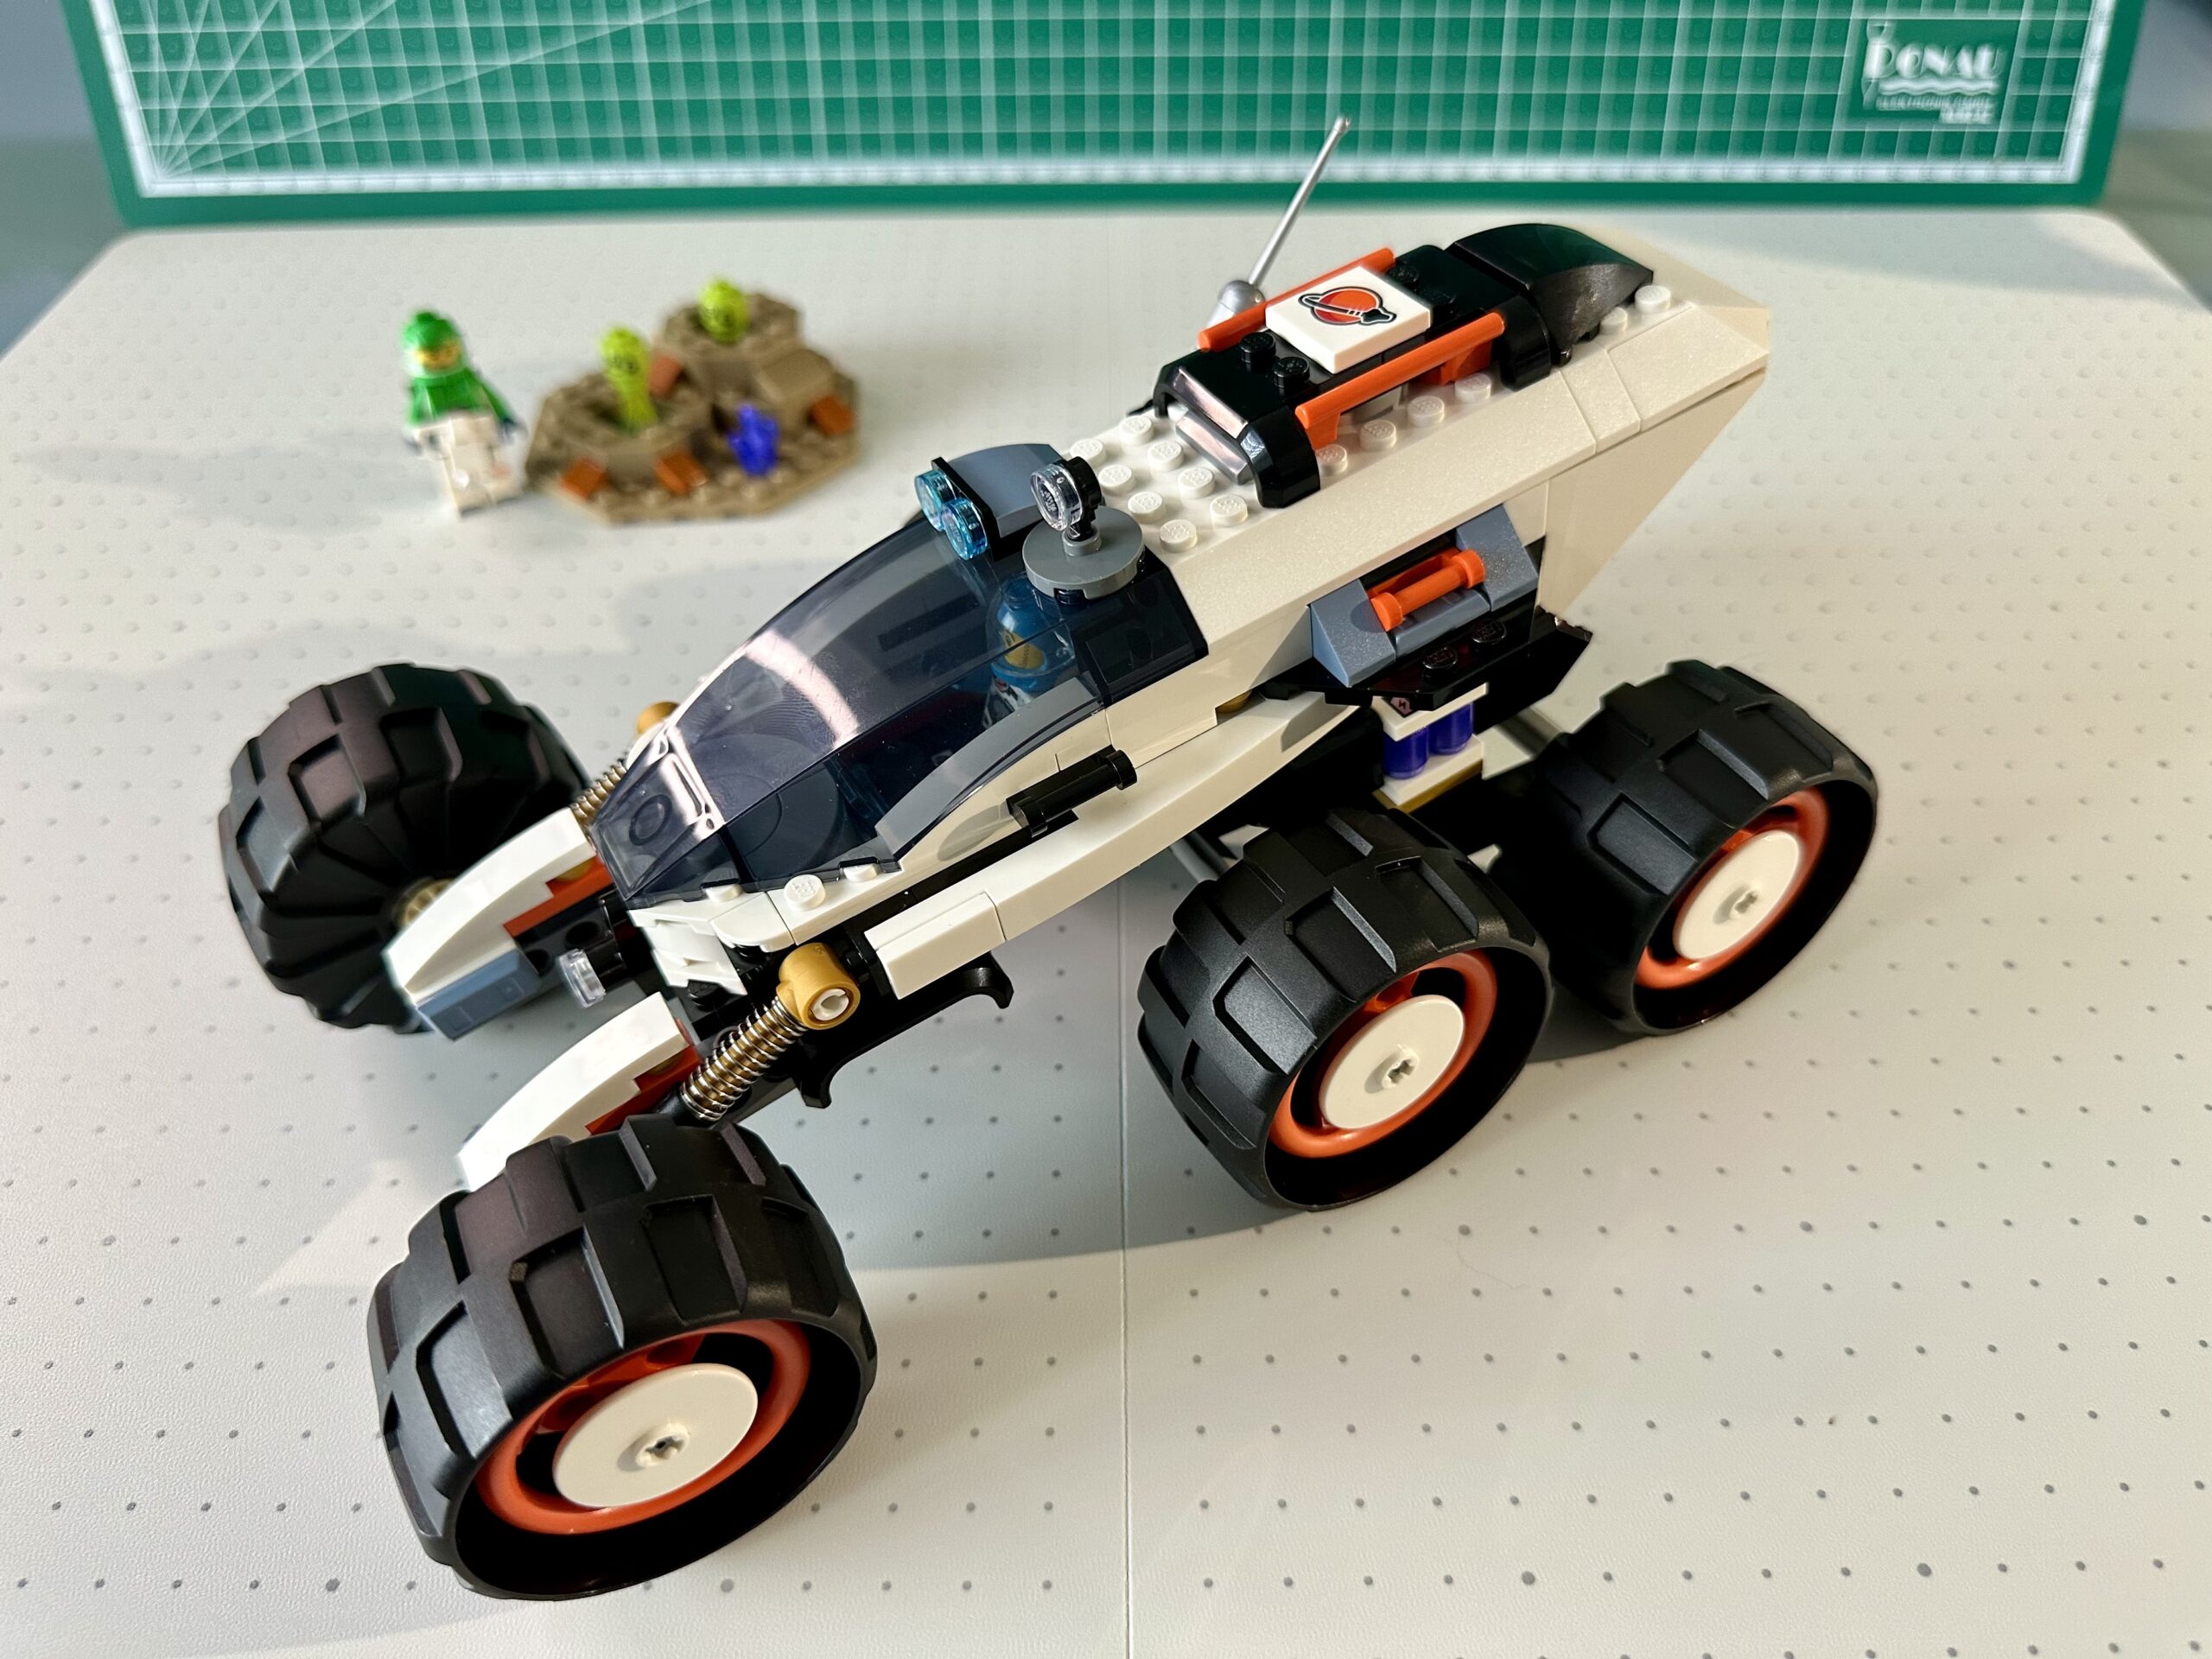 Six-wheeled rover in white with black and reddish orange trim. With its raised suspension it looks a bit like a monster truck.